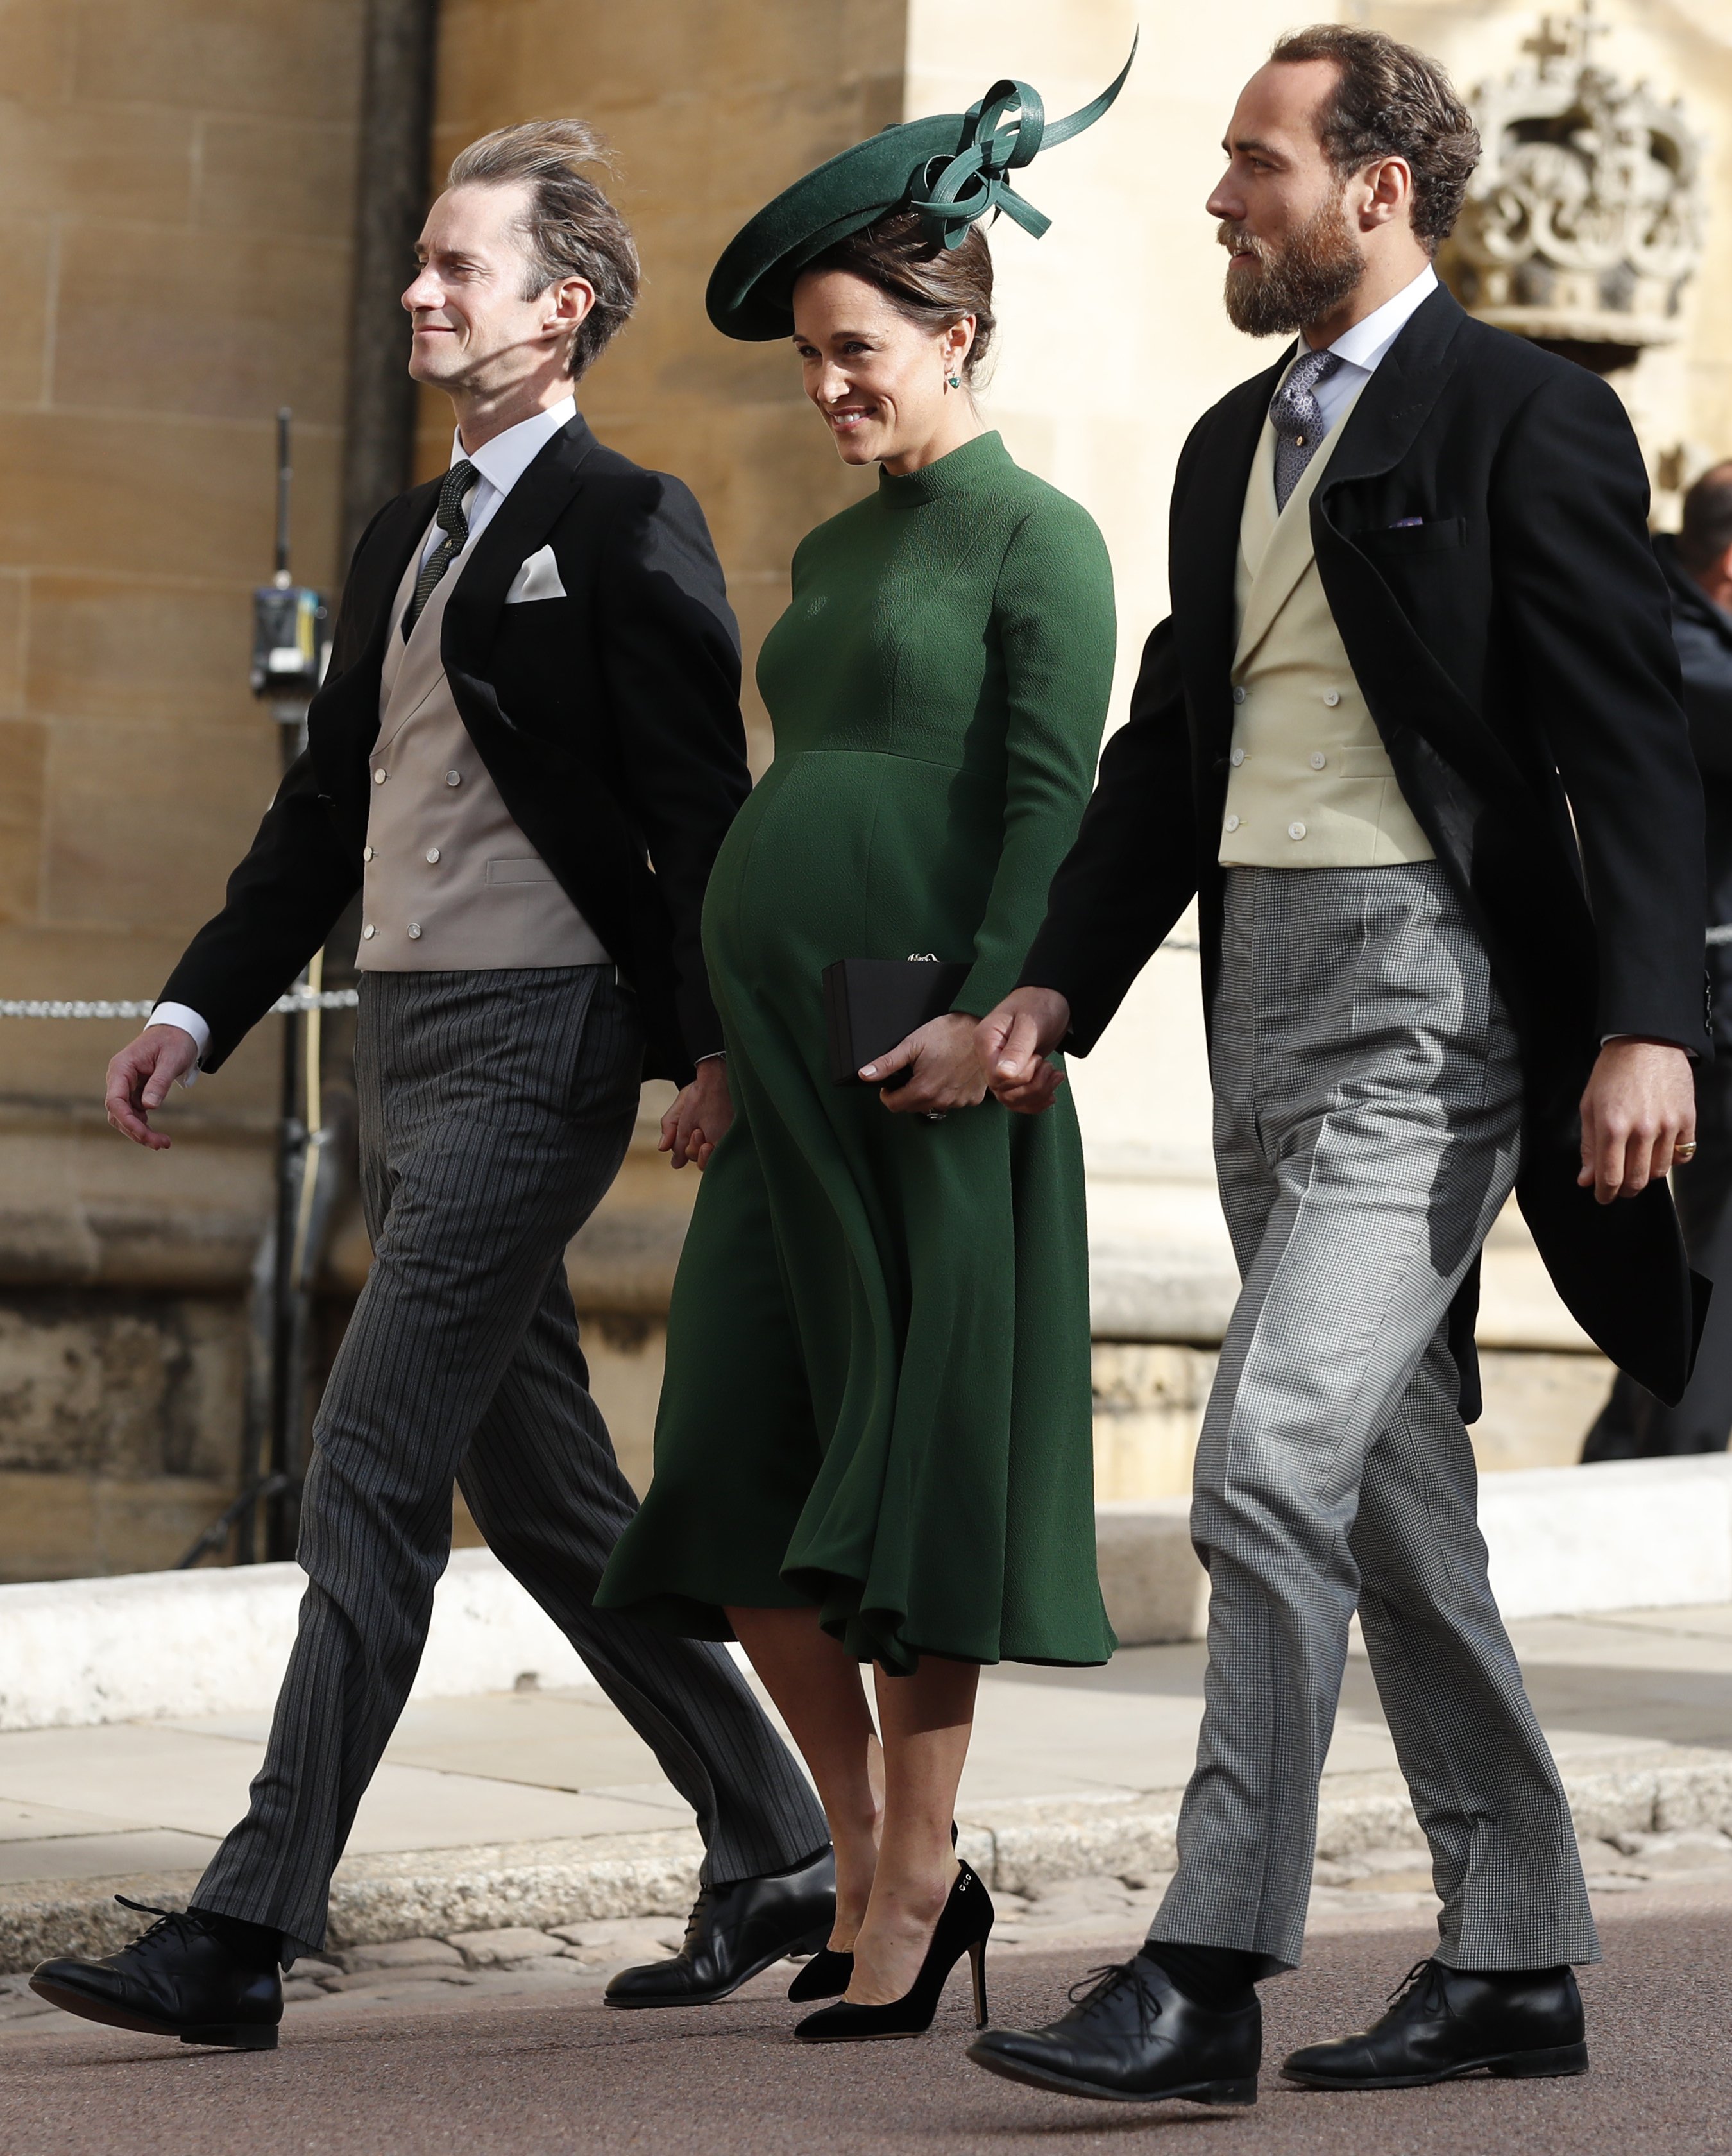 James Middleton, Pippa Middleton and James Matthews arrive for the wedding of Princess Eugenie of York and Jack Brooksbank. | Source: Getty Images